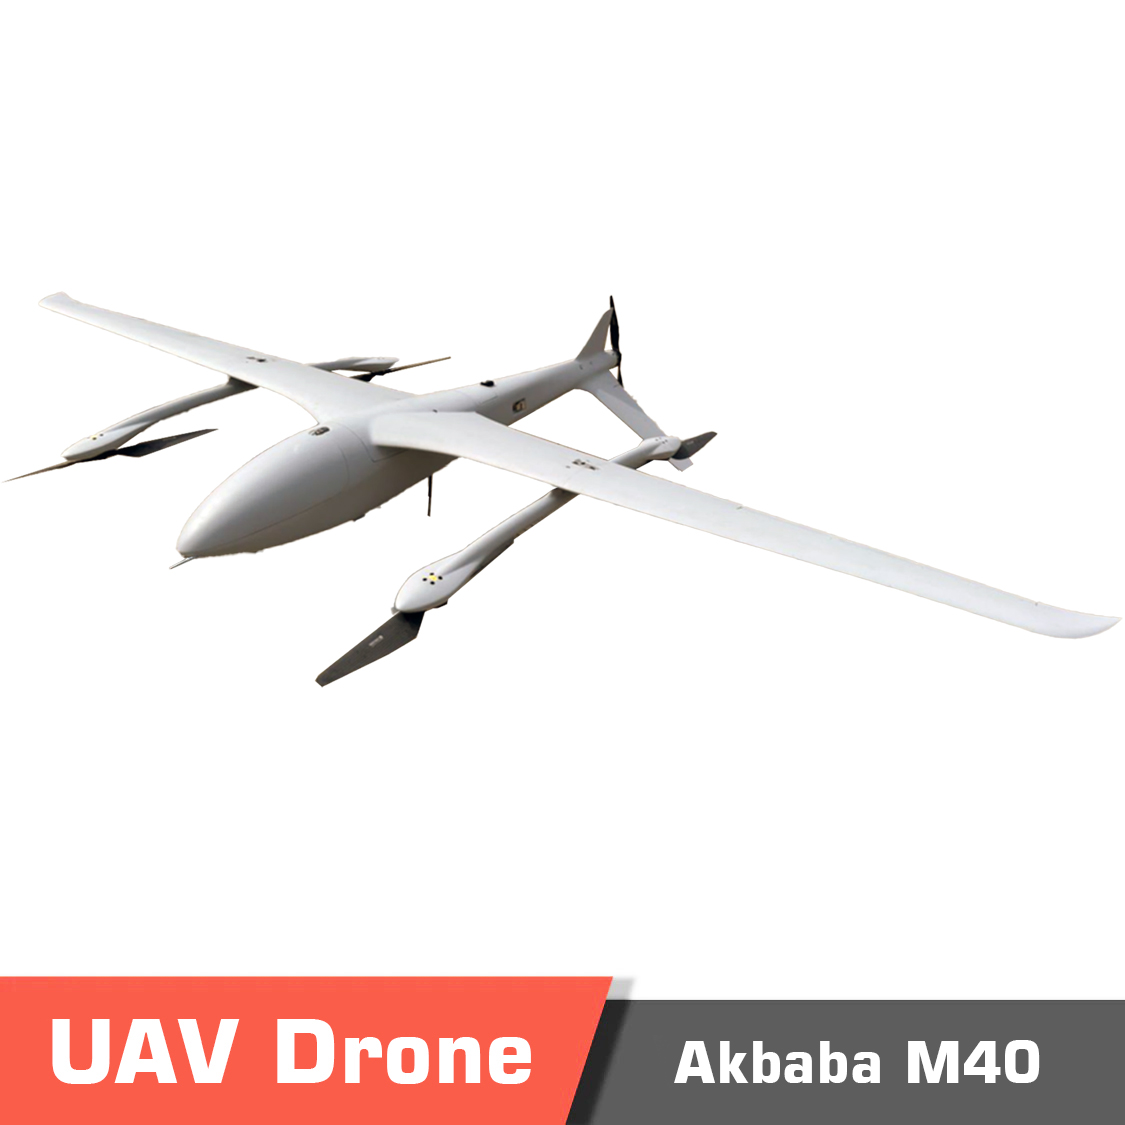 Akbaba1 - eule m800, long endurance, fixedwing uav, cargo drone, wind resistance, detachable load, mapping drone, detachable payload, surveying drone, fixed-wing uav, heavy lift drone, vertical take-off, vertical landing, redundant sensors, four-axis, eight-propeller rotor, low temperature resistance - motionew - 2